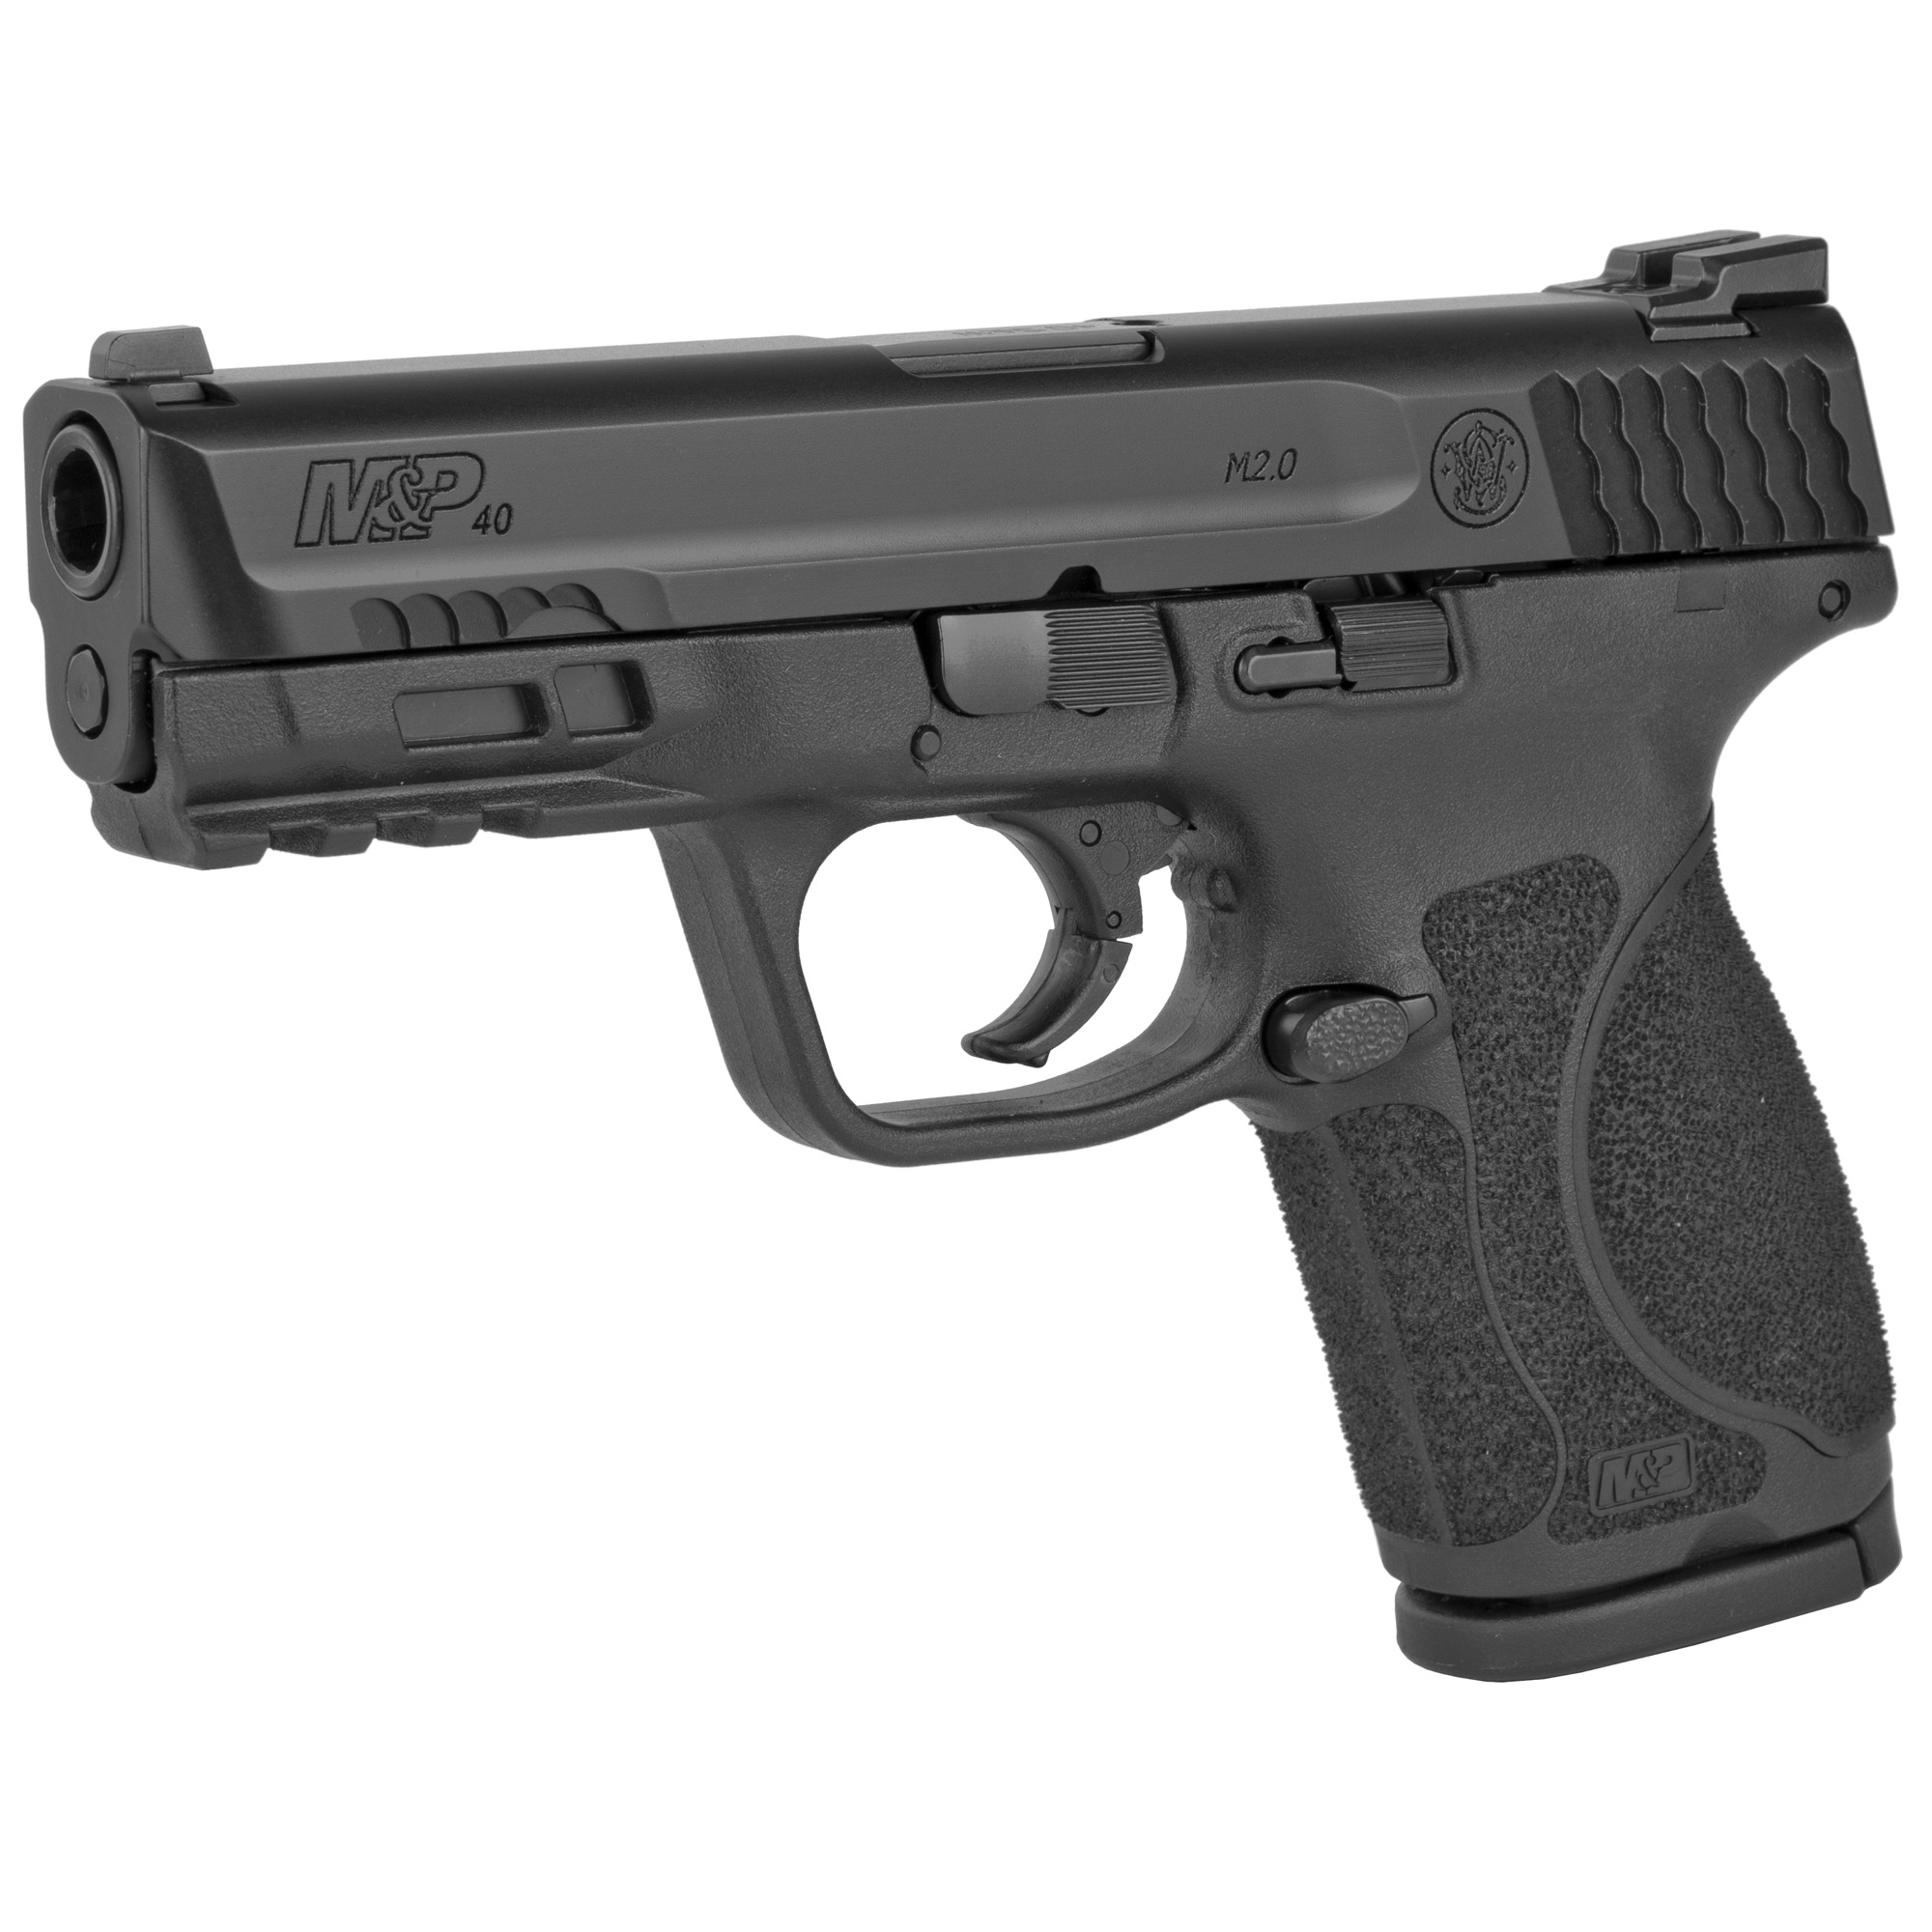 Smith & Wesson, M&P 2.0, Striker Fired, Semi-automatic, Polymer Frame Pistol, Compact, 40 S&W, 4" Barrel, Armornite Finish, Black, Fixed Sights, 13 Rounds, 2 Magazines